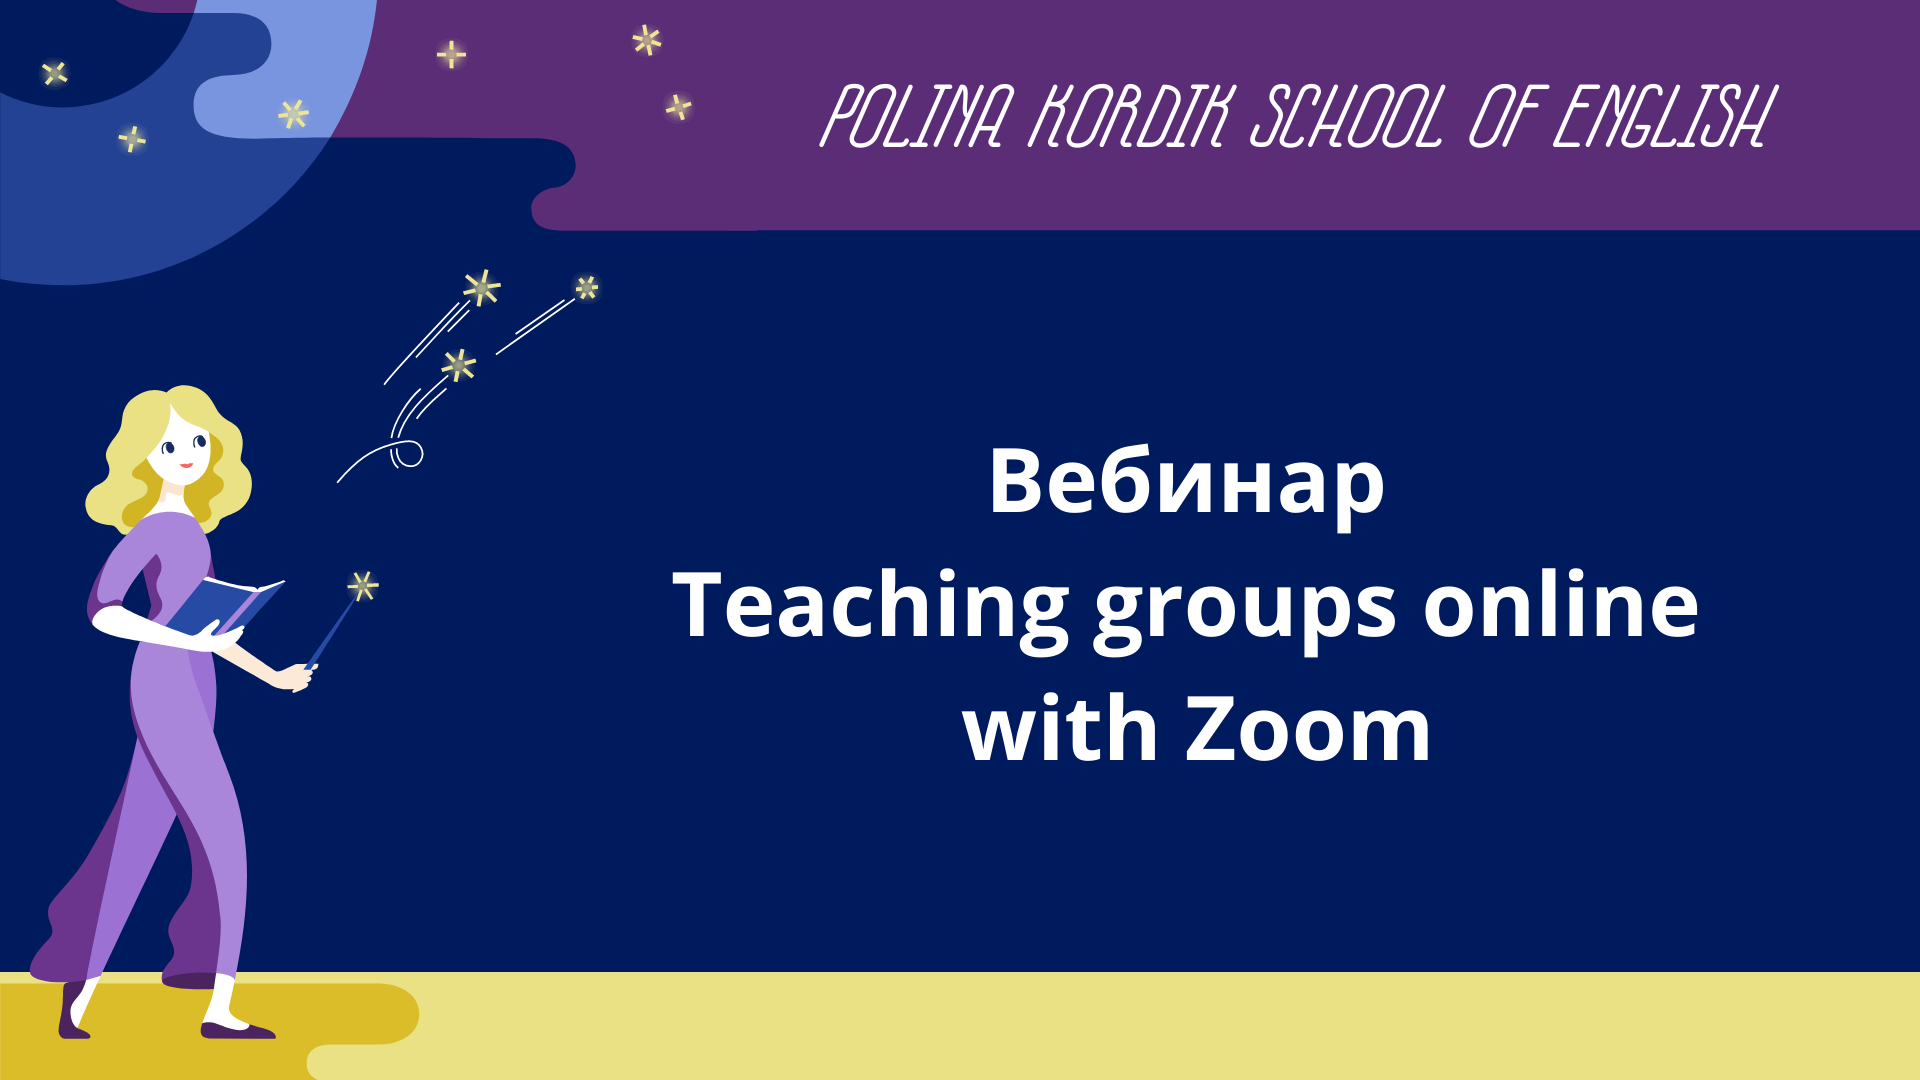 Teaching groups online with Zoom